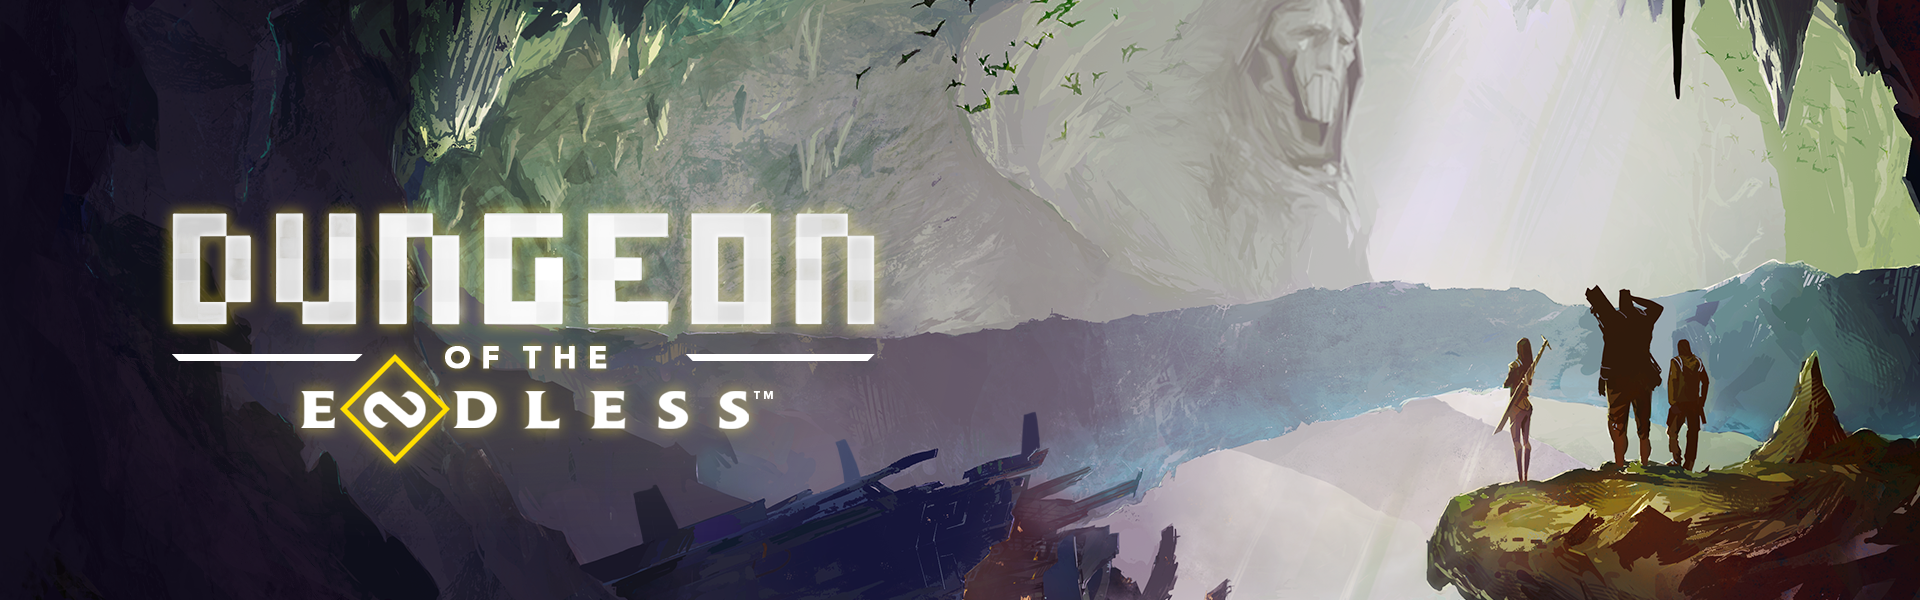 Dungeon of the Endless has made its way to mobile, but it's